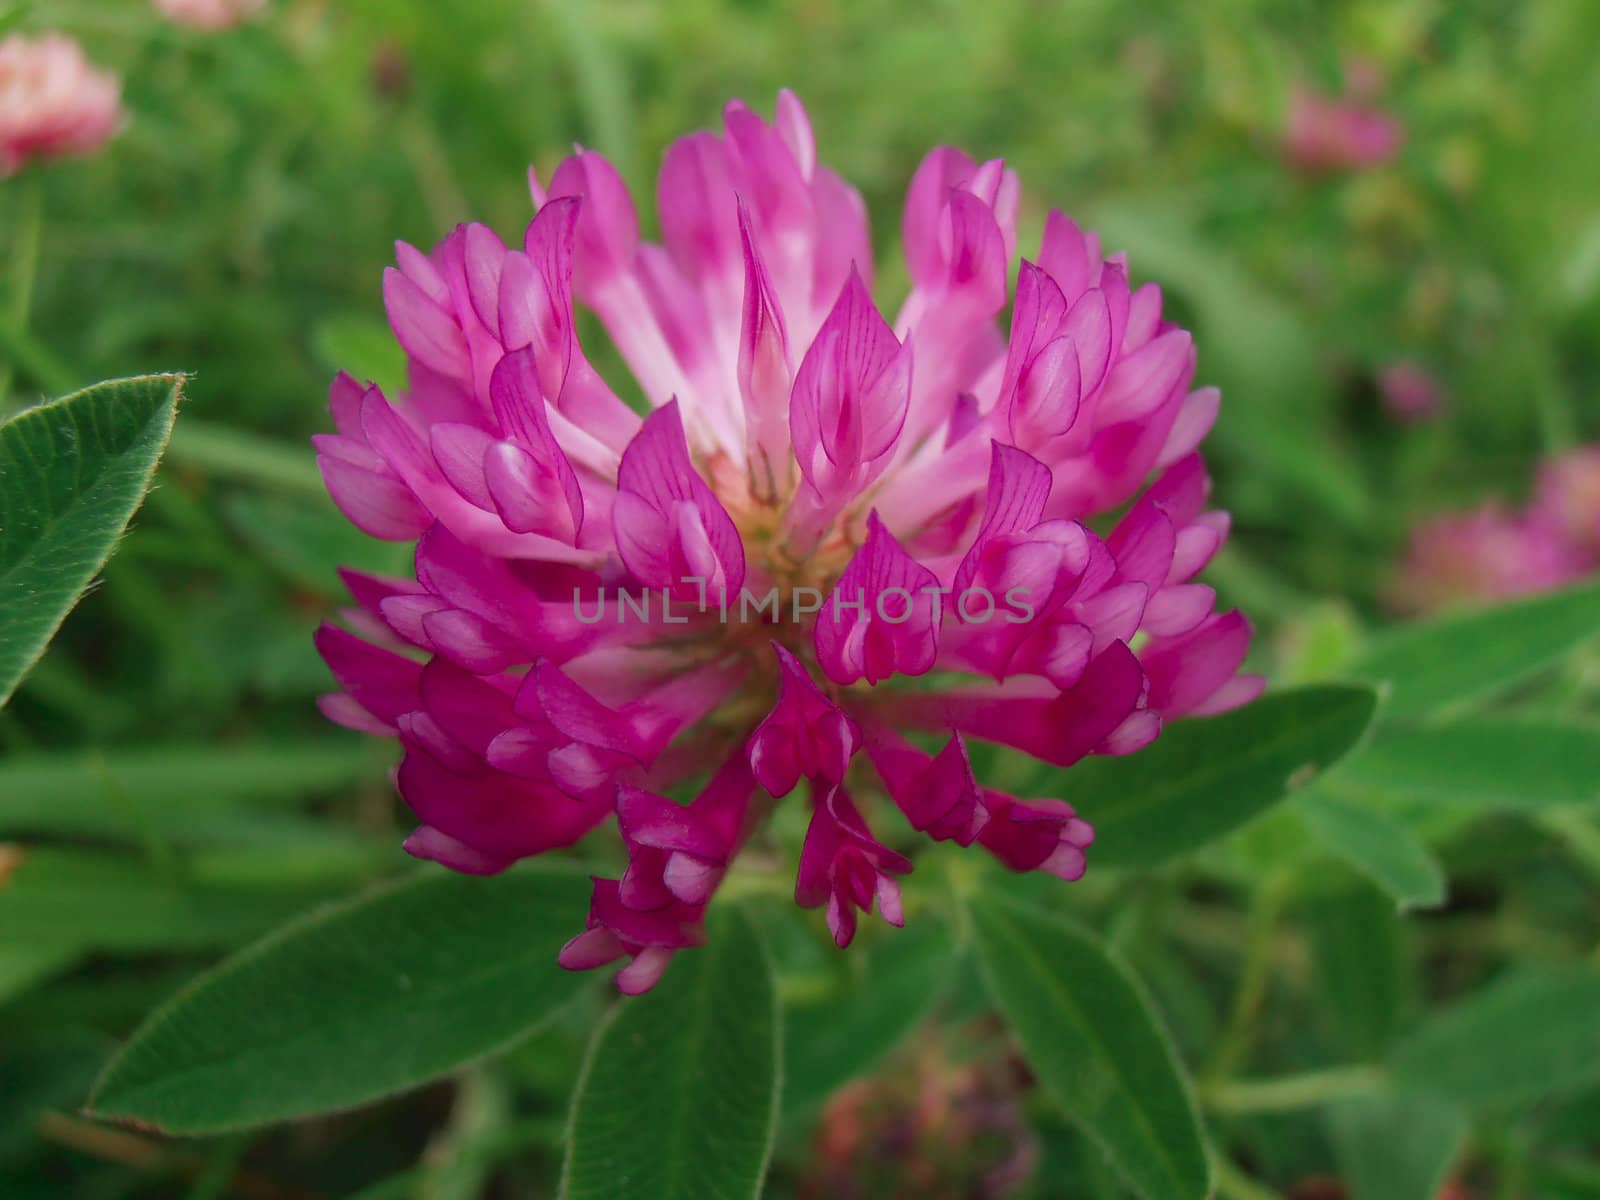 Trifolium pratense (red clover) is a species of clover, native to Europe, Western Asia and northwest Africa